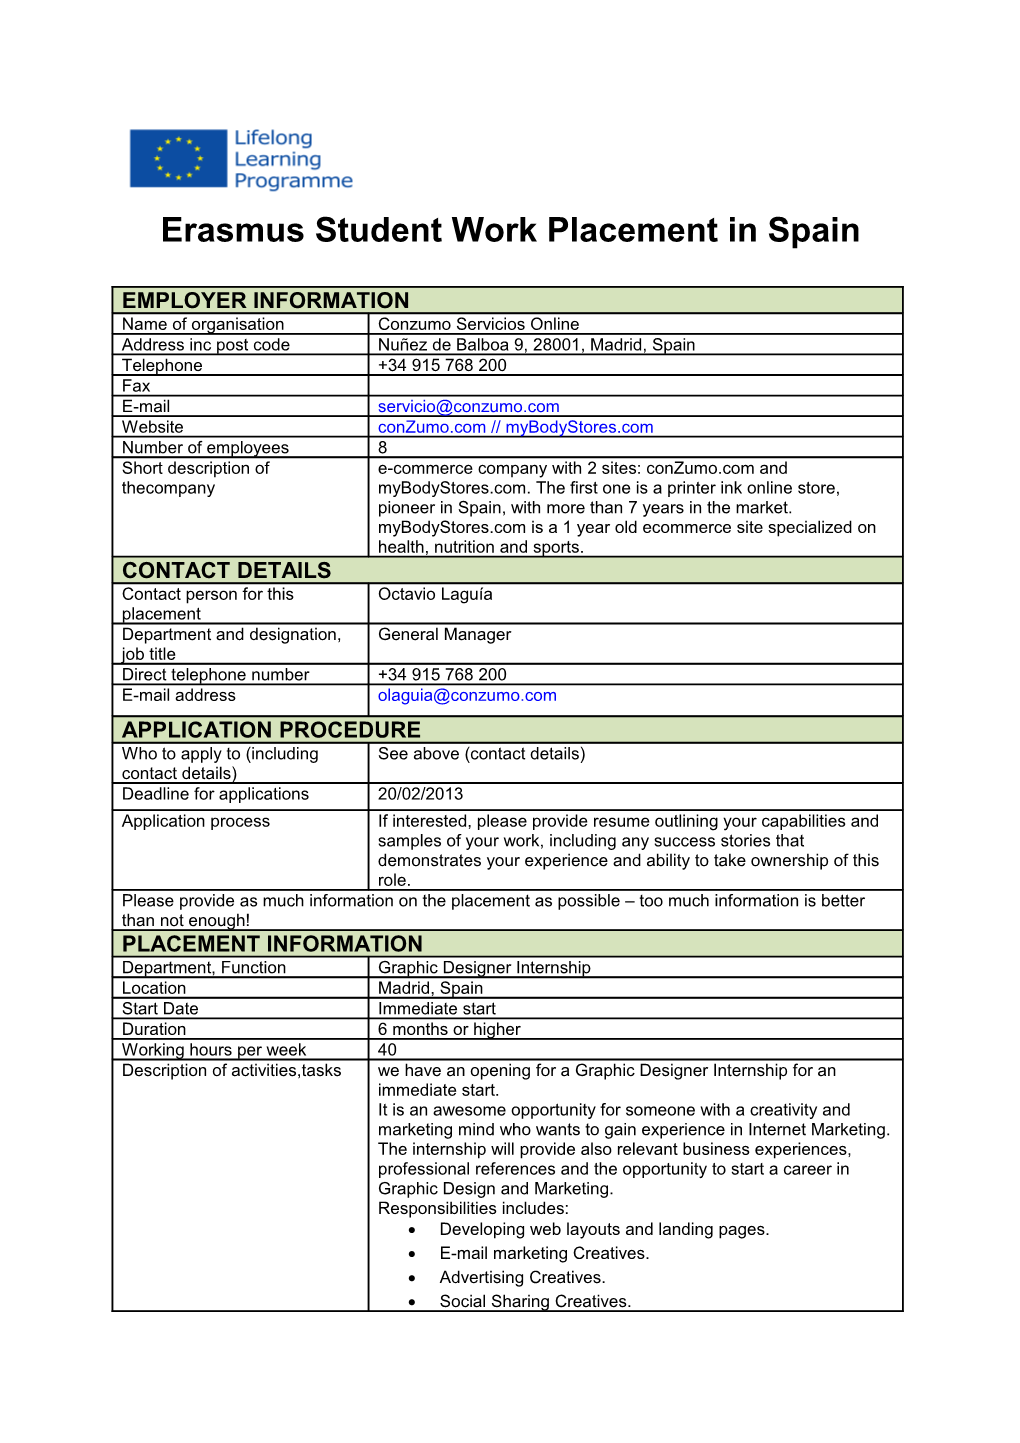 Erasmus Student Work Placement in the UK s8